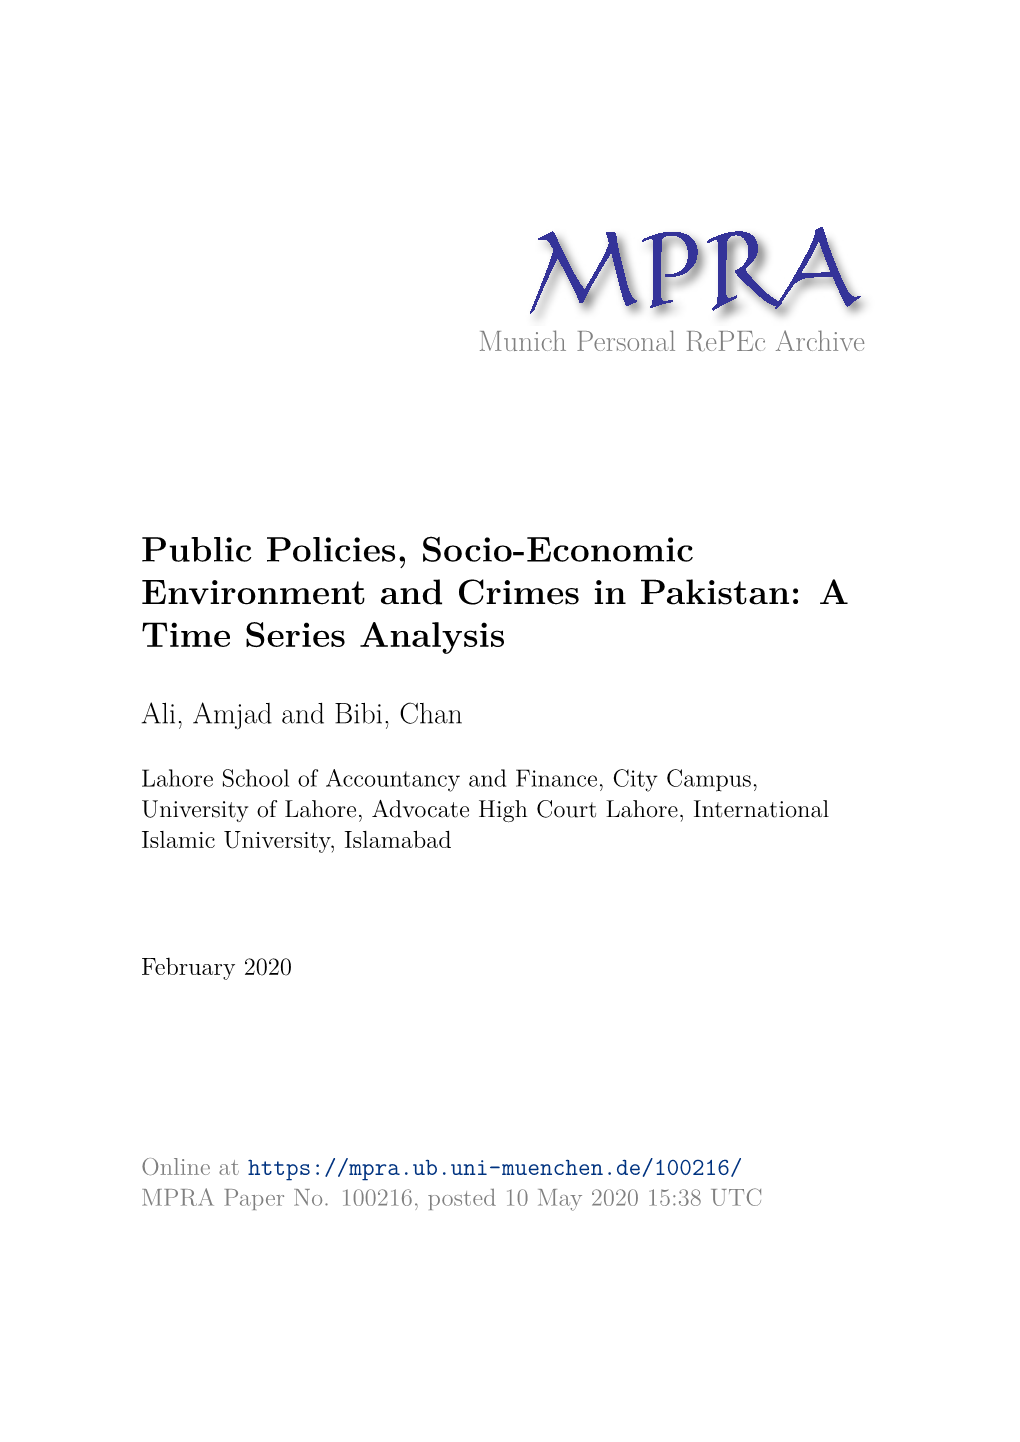 Public Policies, Socio-Economic Environment and Crimes in Pakistan: a Time Series Analysis